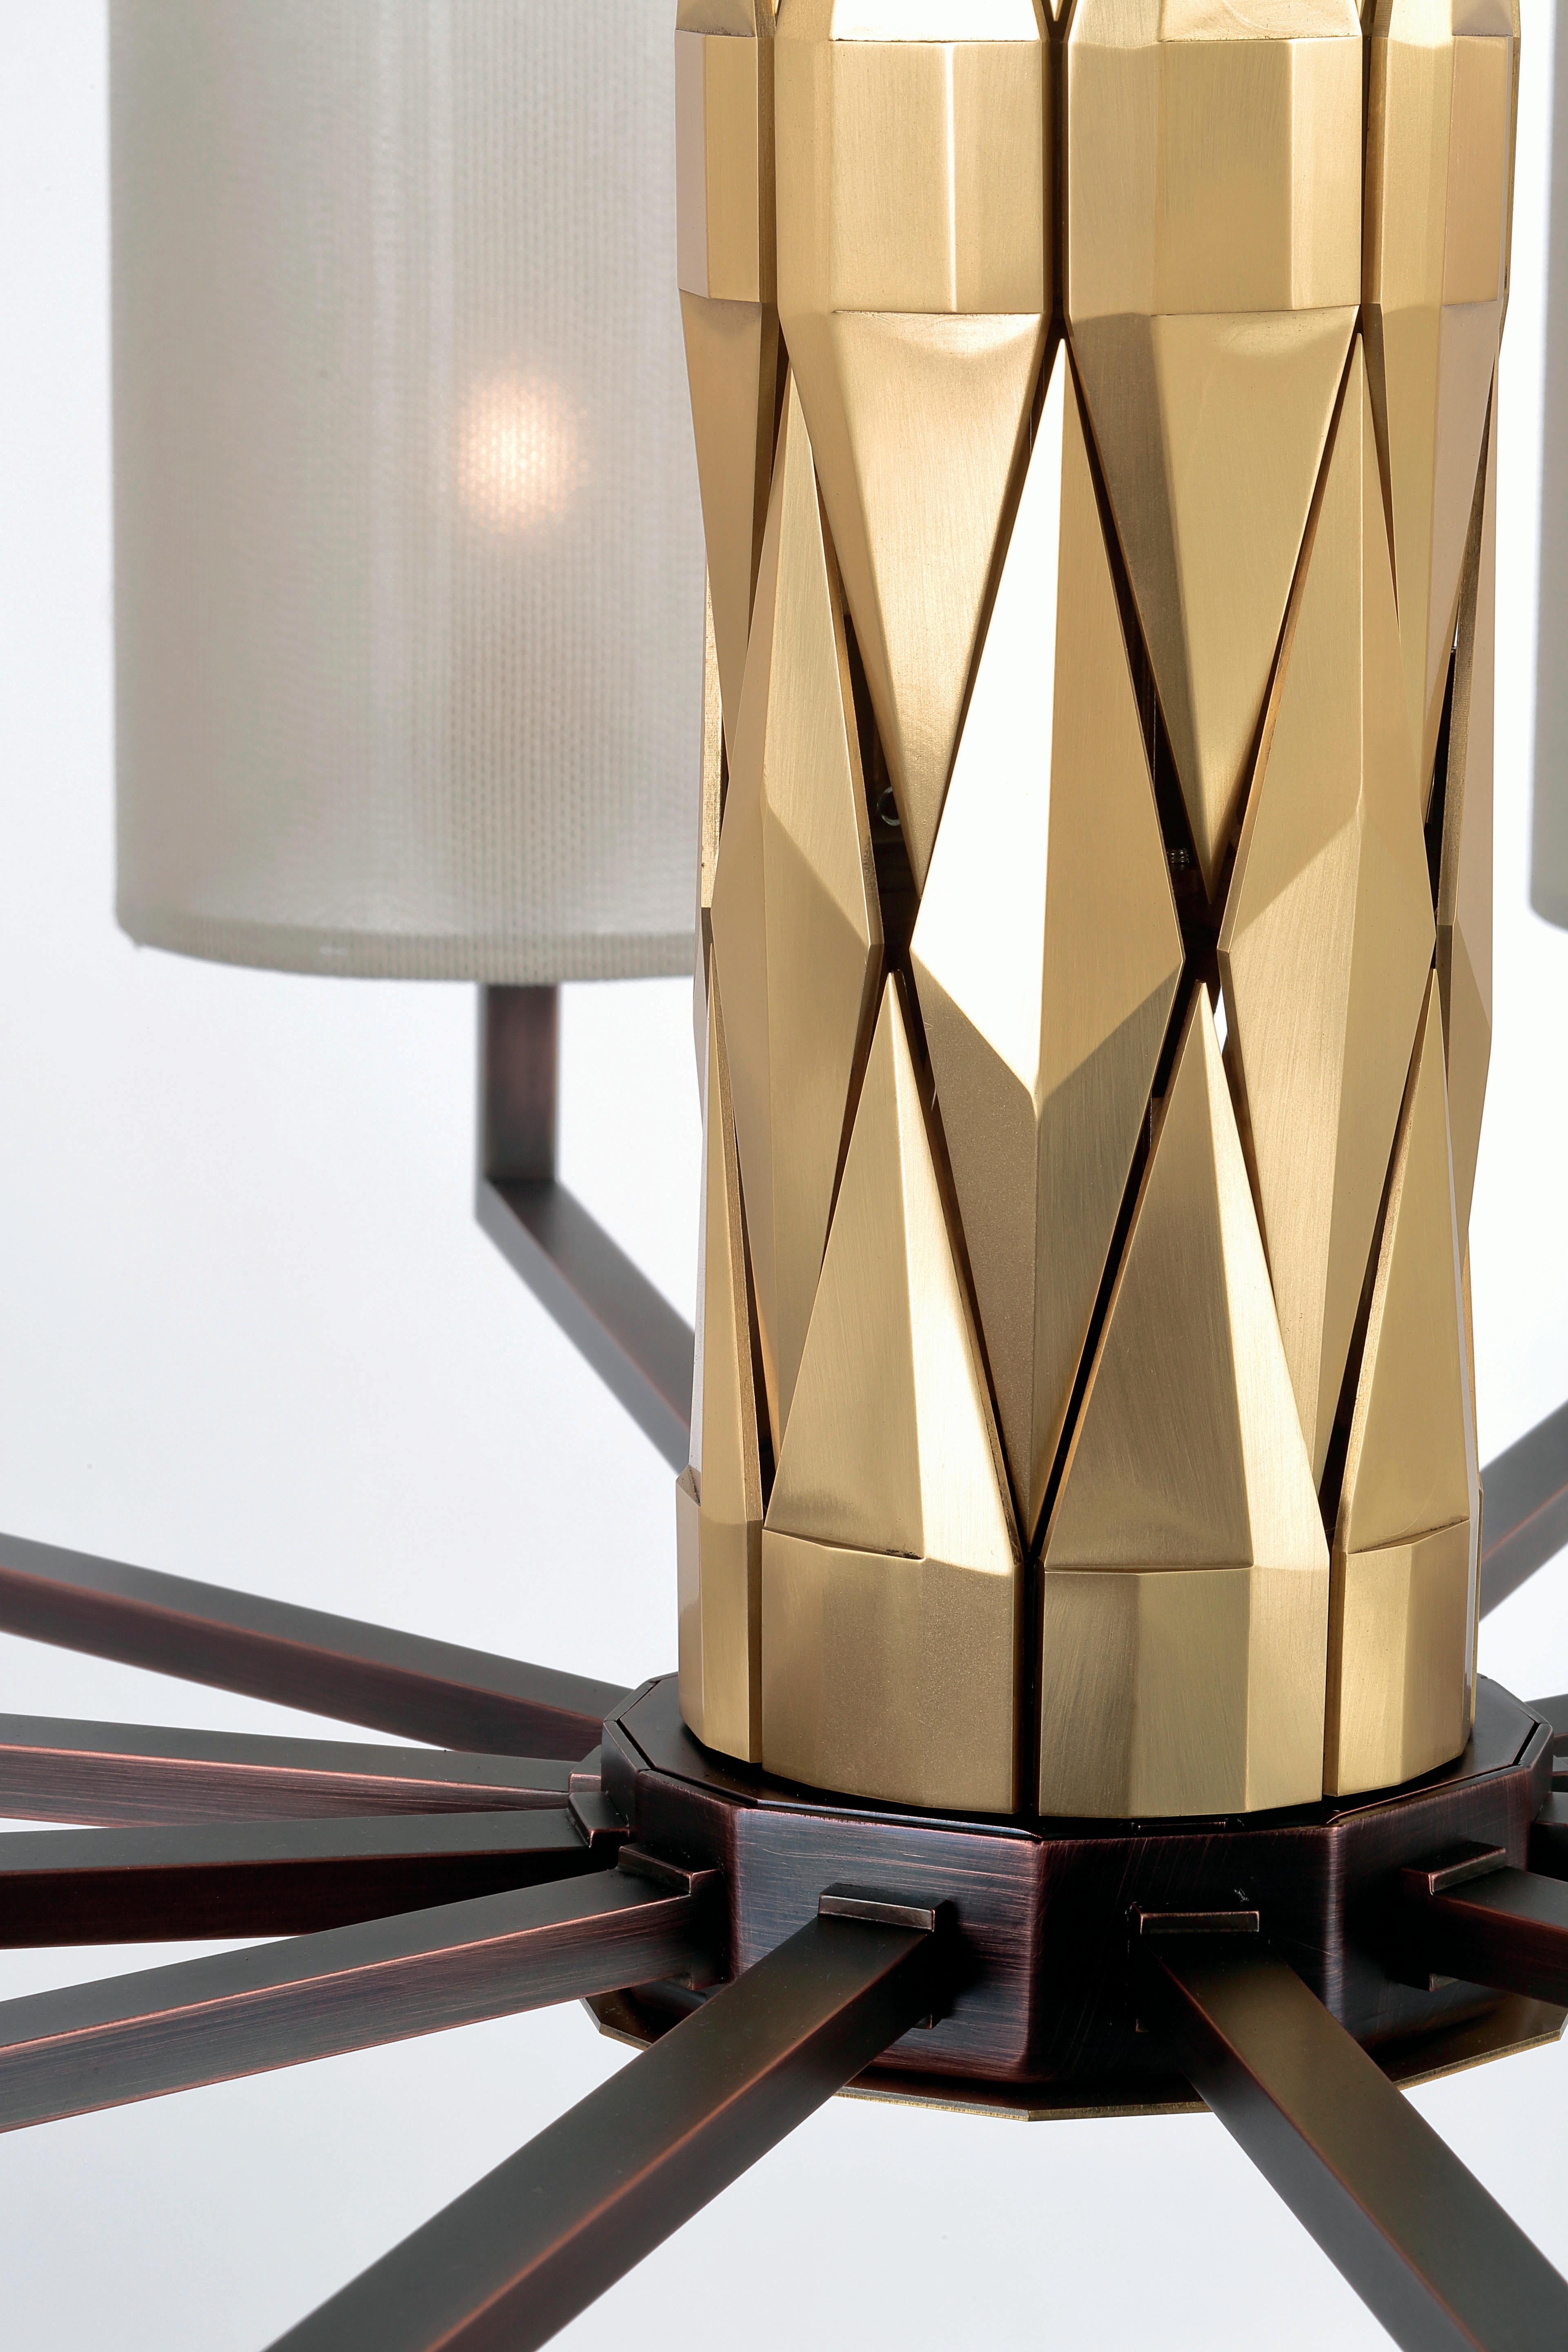 Flaire collection, rich central body composed of many solid brass elements, beveled in various ways for an array of facets.

Central structure and detailing in solid natural brass, lamp holders, base and inner structure in burnished copper finish.